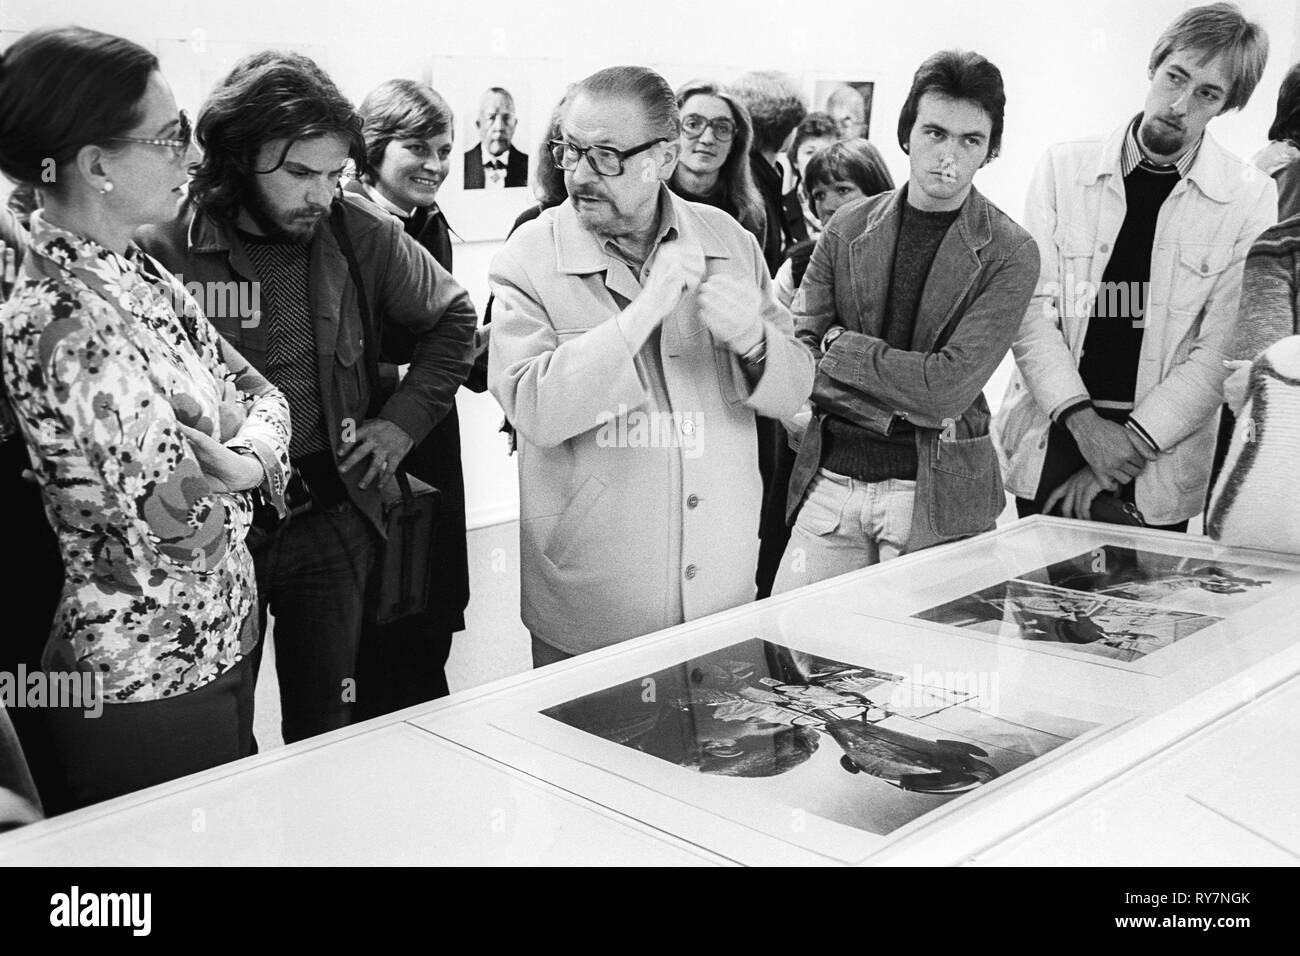 Professor Otto Steinert (middle) at a photography exhibition  with portraits he made, picture taken 1976. Professor Otto Steinert (born 12. July 1915, death 3. March 1978) was one of the most important teachers of modern photography and photojournalism and taught from 1959 until his death at the Folkwang School of Design in Essen, Germany. Stock Photo